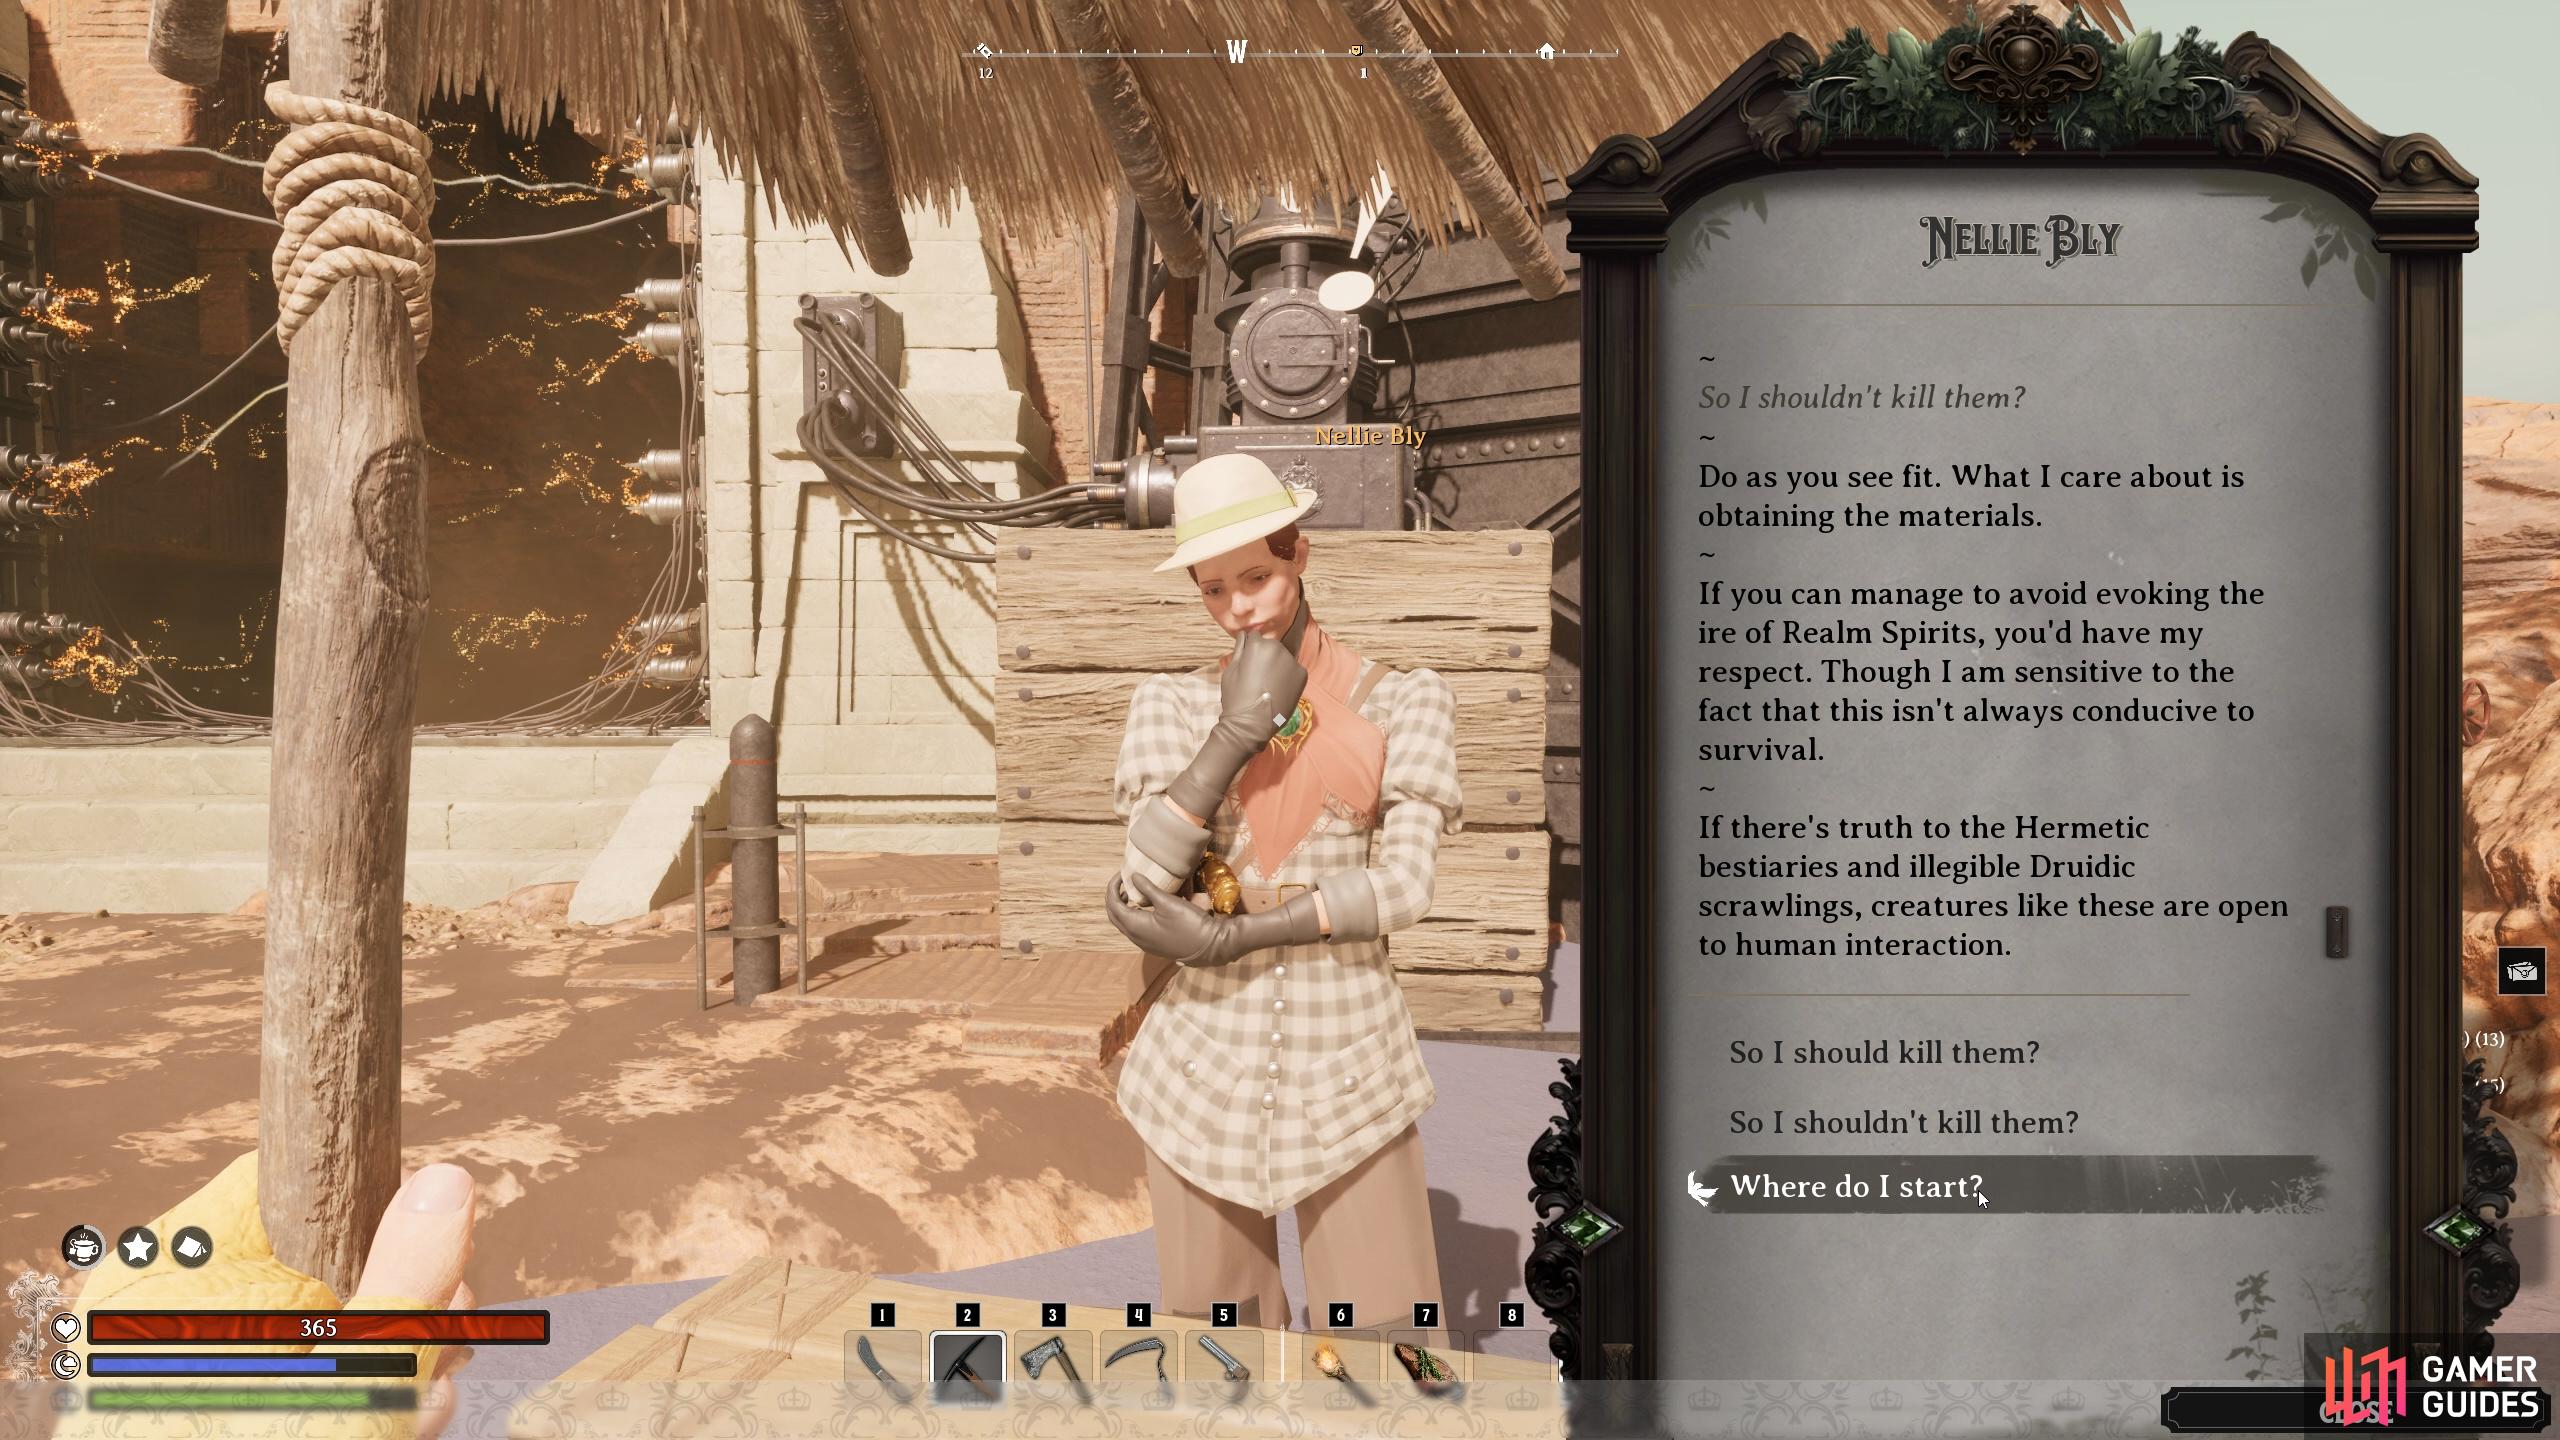 You can start The Sun Giant’s Prize by speaking to Nellie Bly in the Desert: Herbarium Realm.